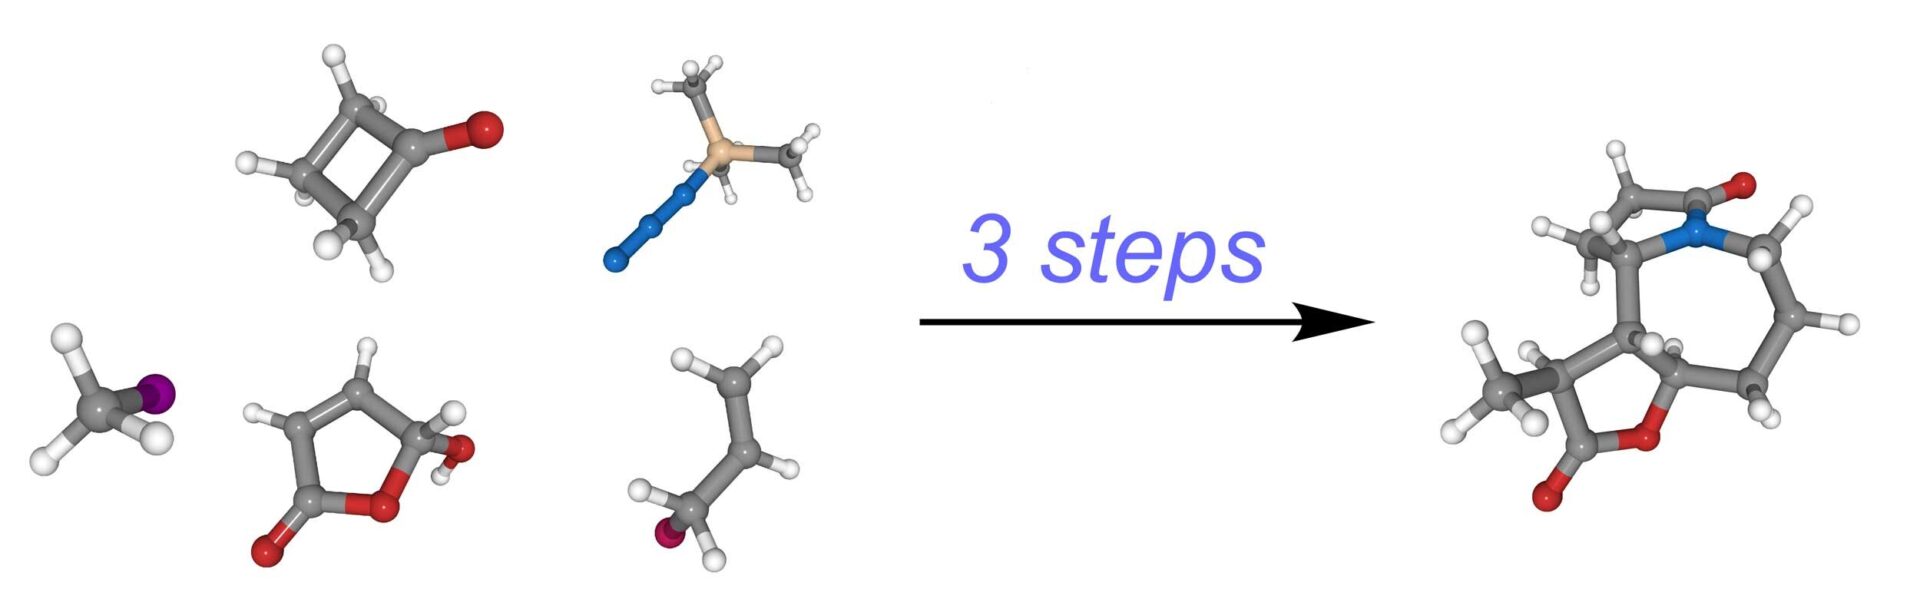 Tim Cernak and team duplicated a complex molecule in only three steps. Image credit: The Cernak Lab